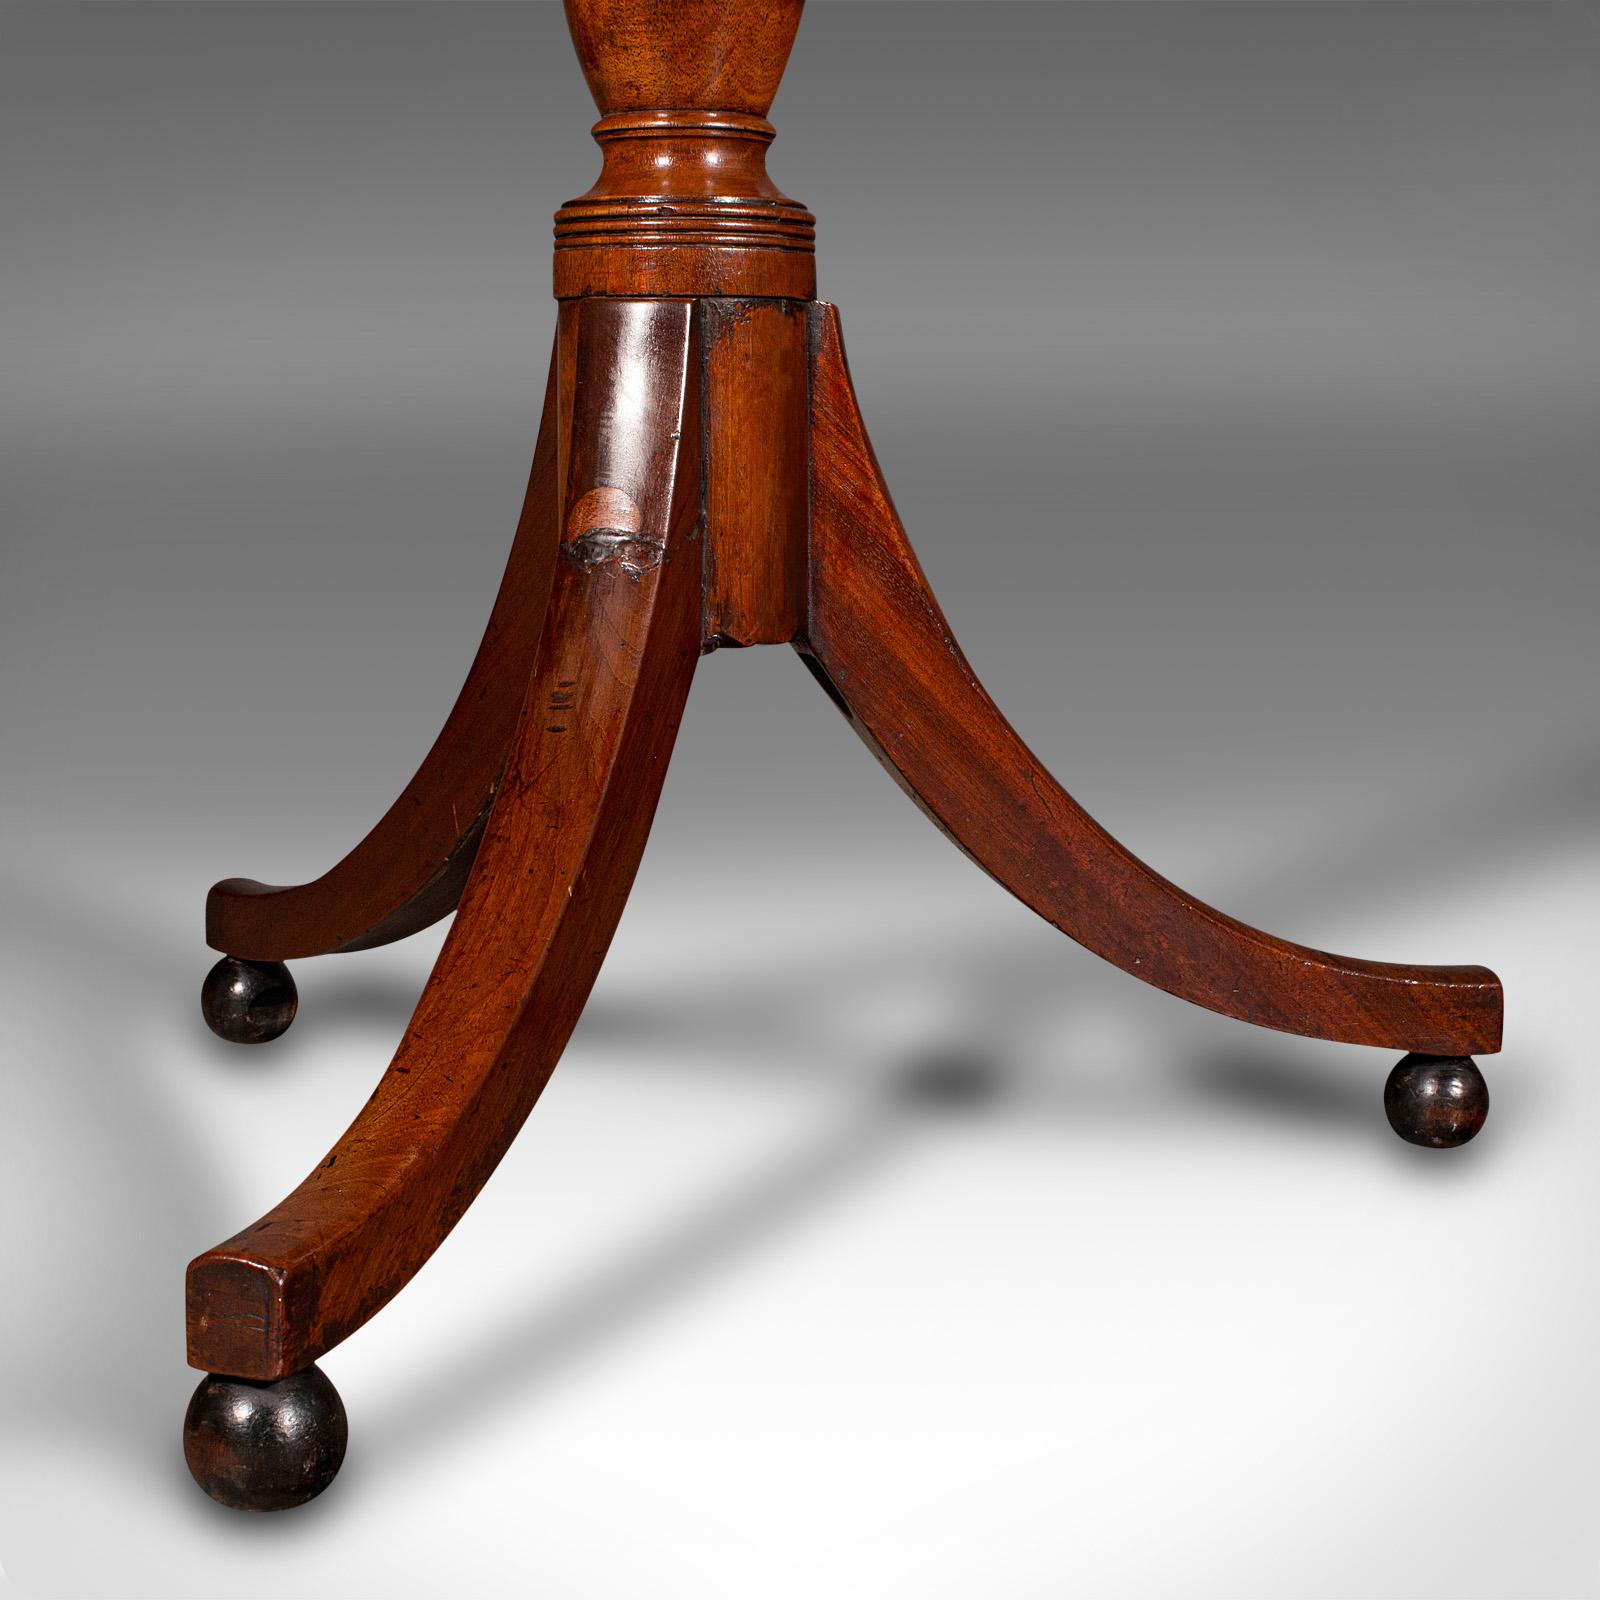 Antique Supper Table, English, Snap Top, Lamp, Occasional, Regency, Circa 1820 For Sale 6